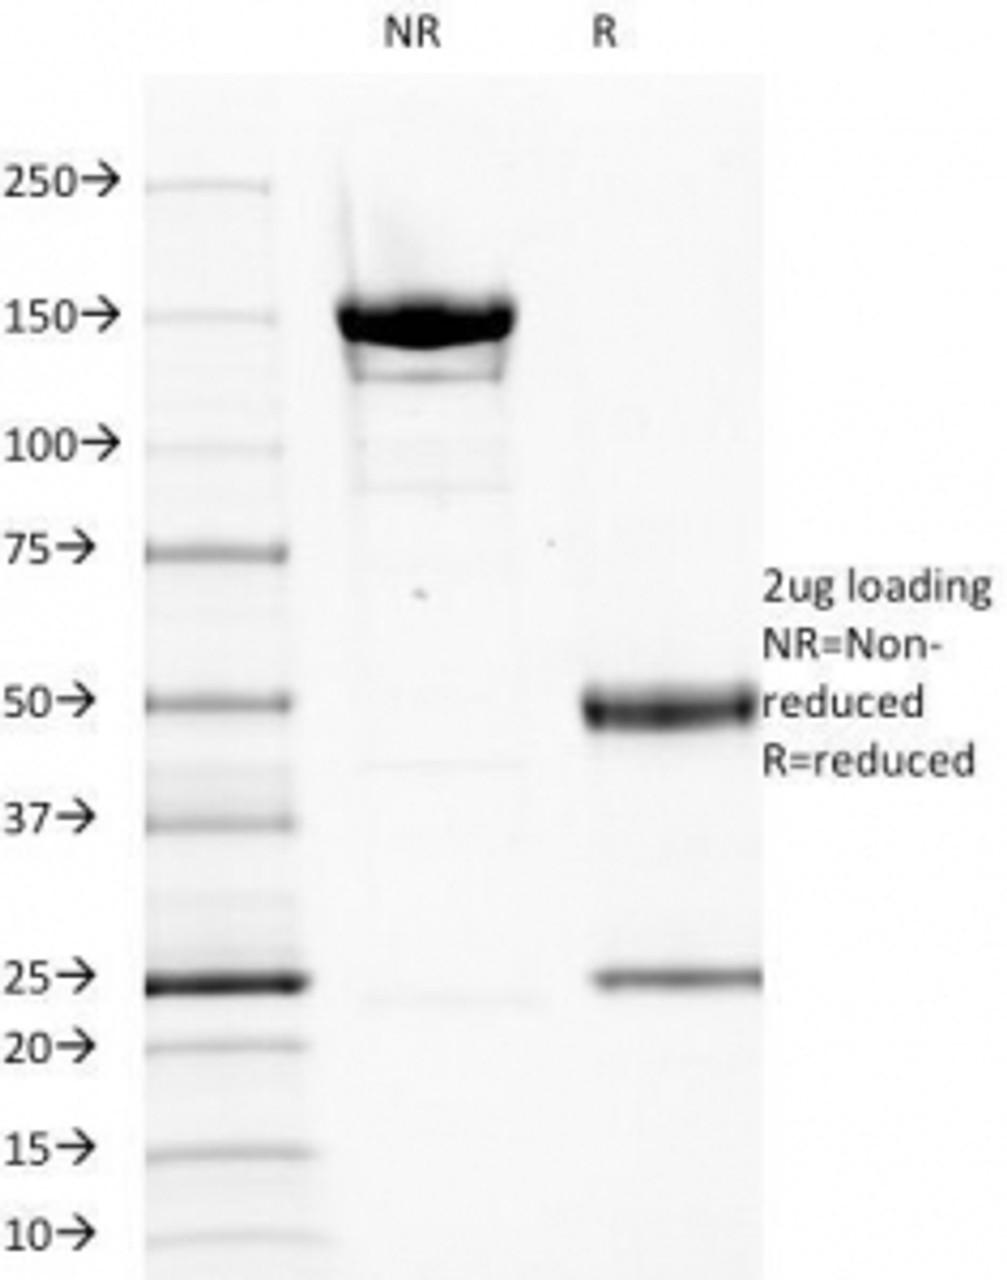 SDS-PAGE Analysis of Purified, BSA-Free EGFR Antibody (clone GFR1195) . Confirmation of Integrity and Purity of the Antibody.